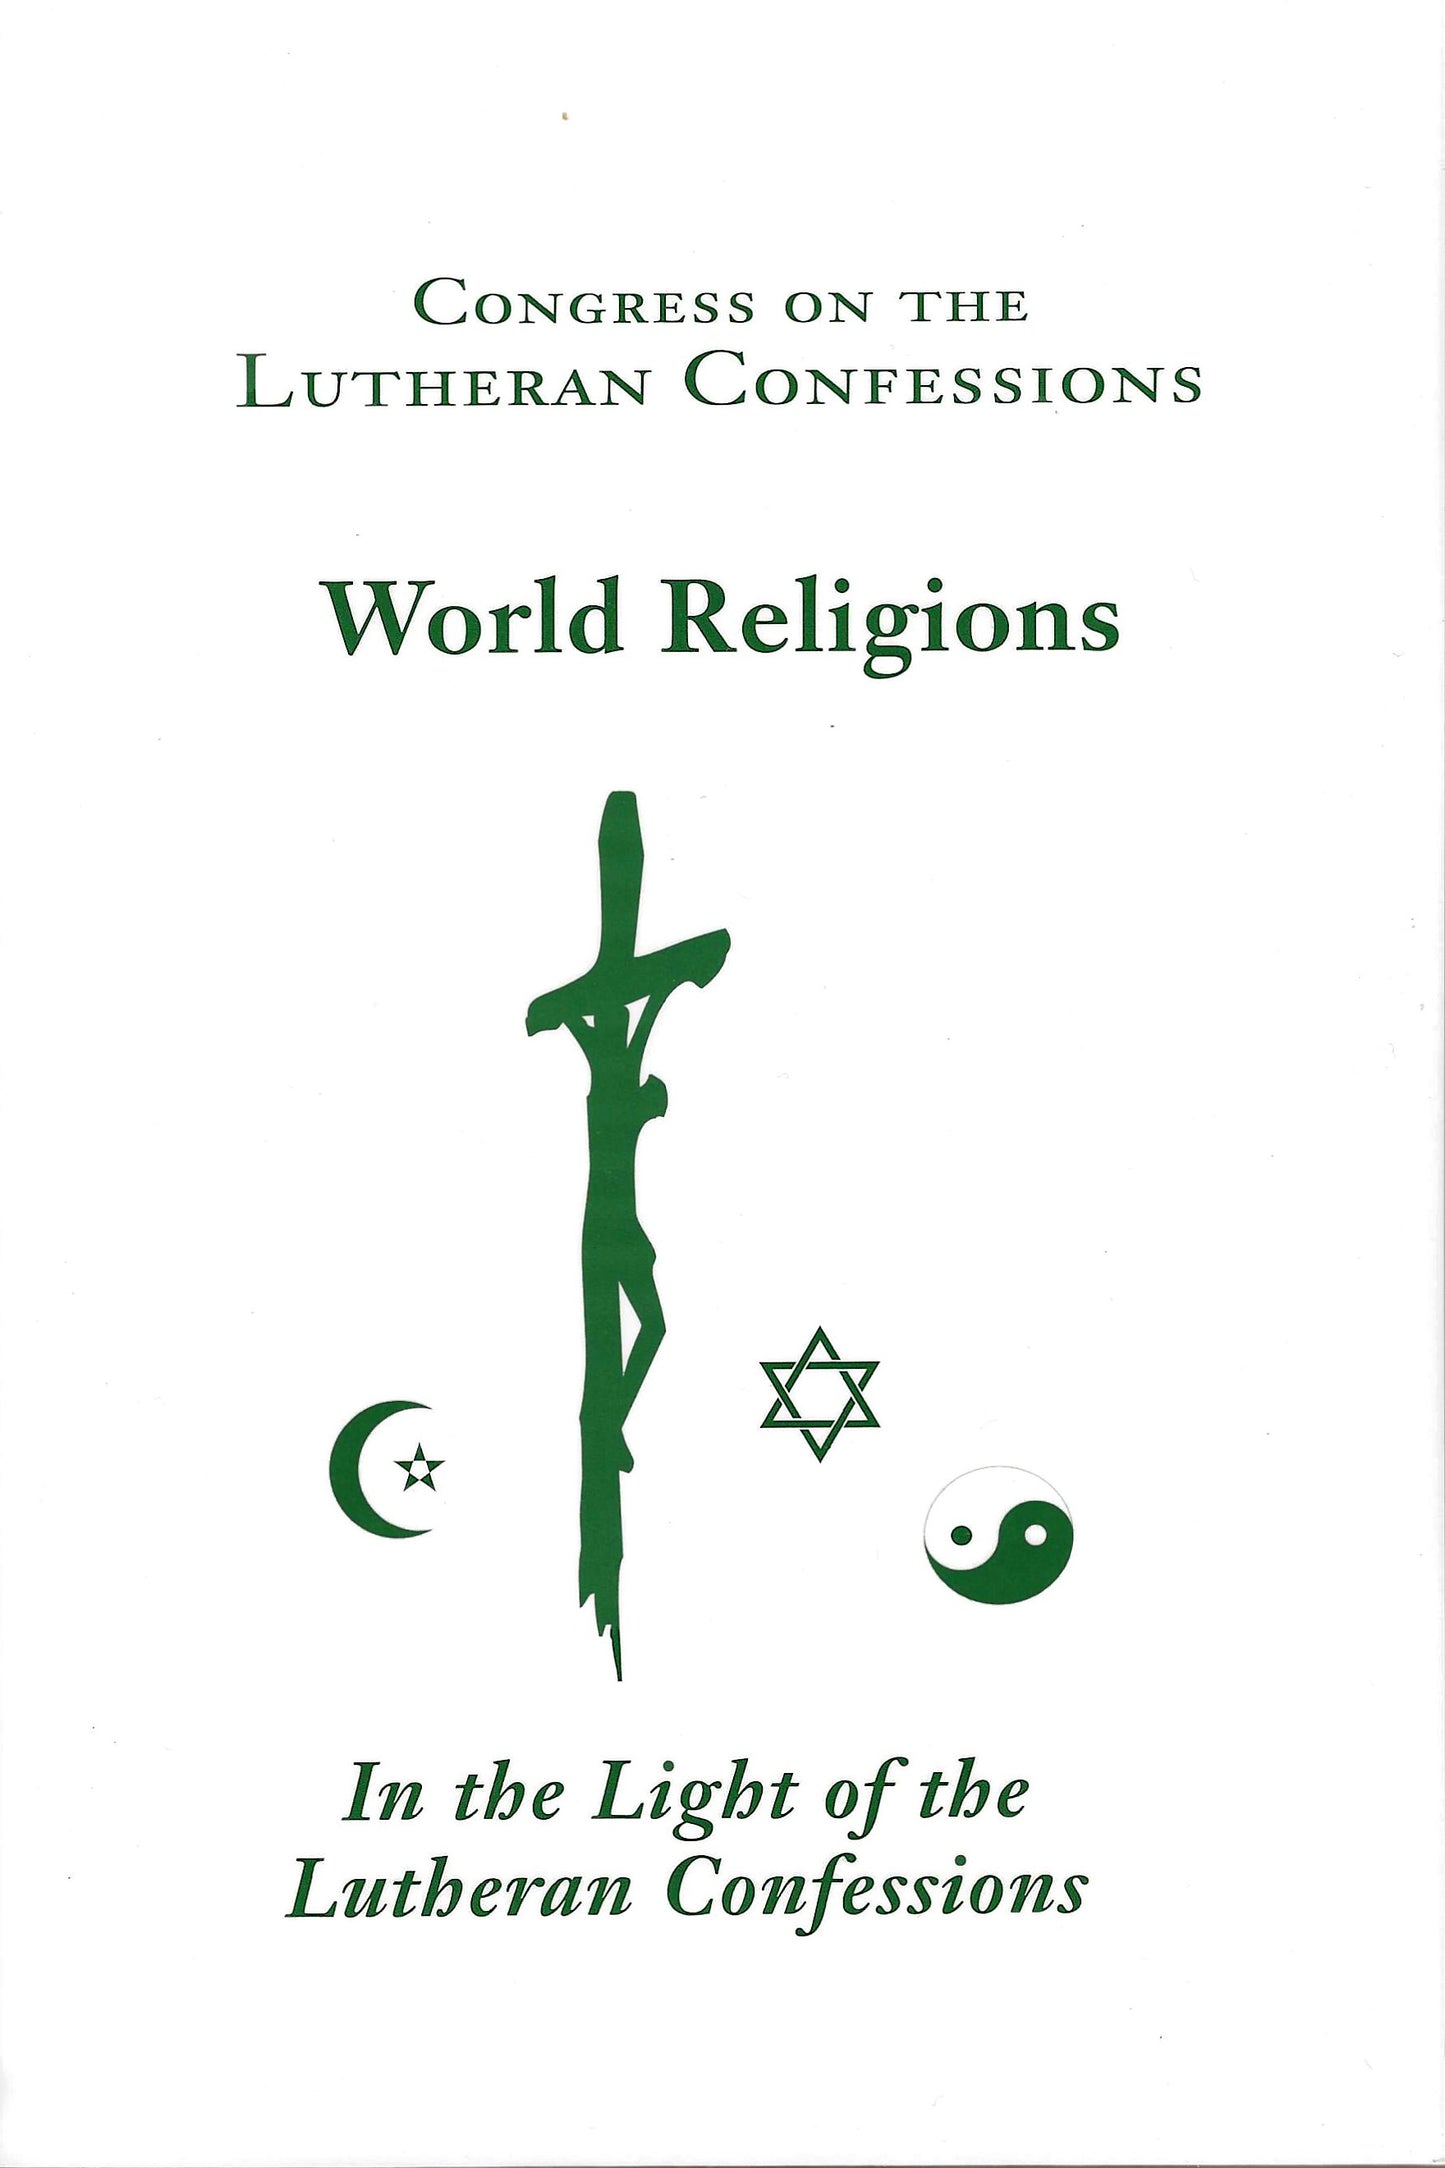 World Religions in the Light of the Lutheran Confessions (Vol. 14, 2007)